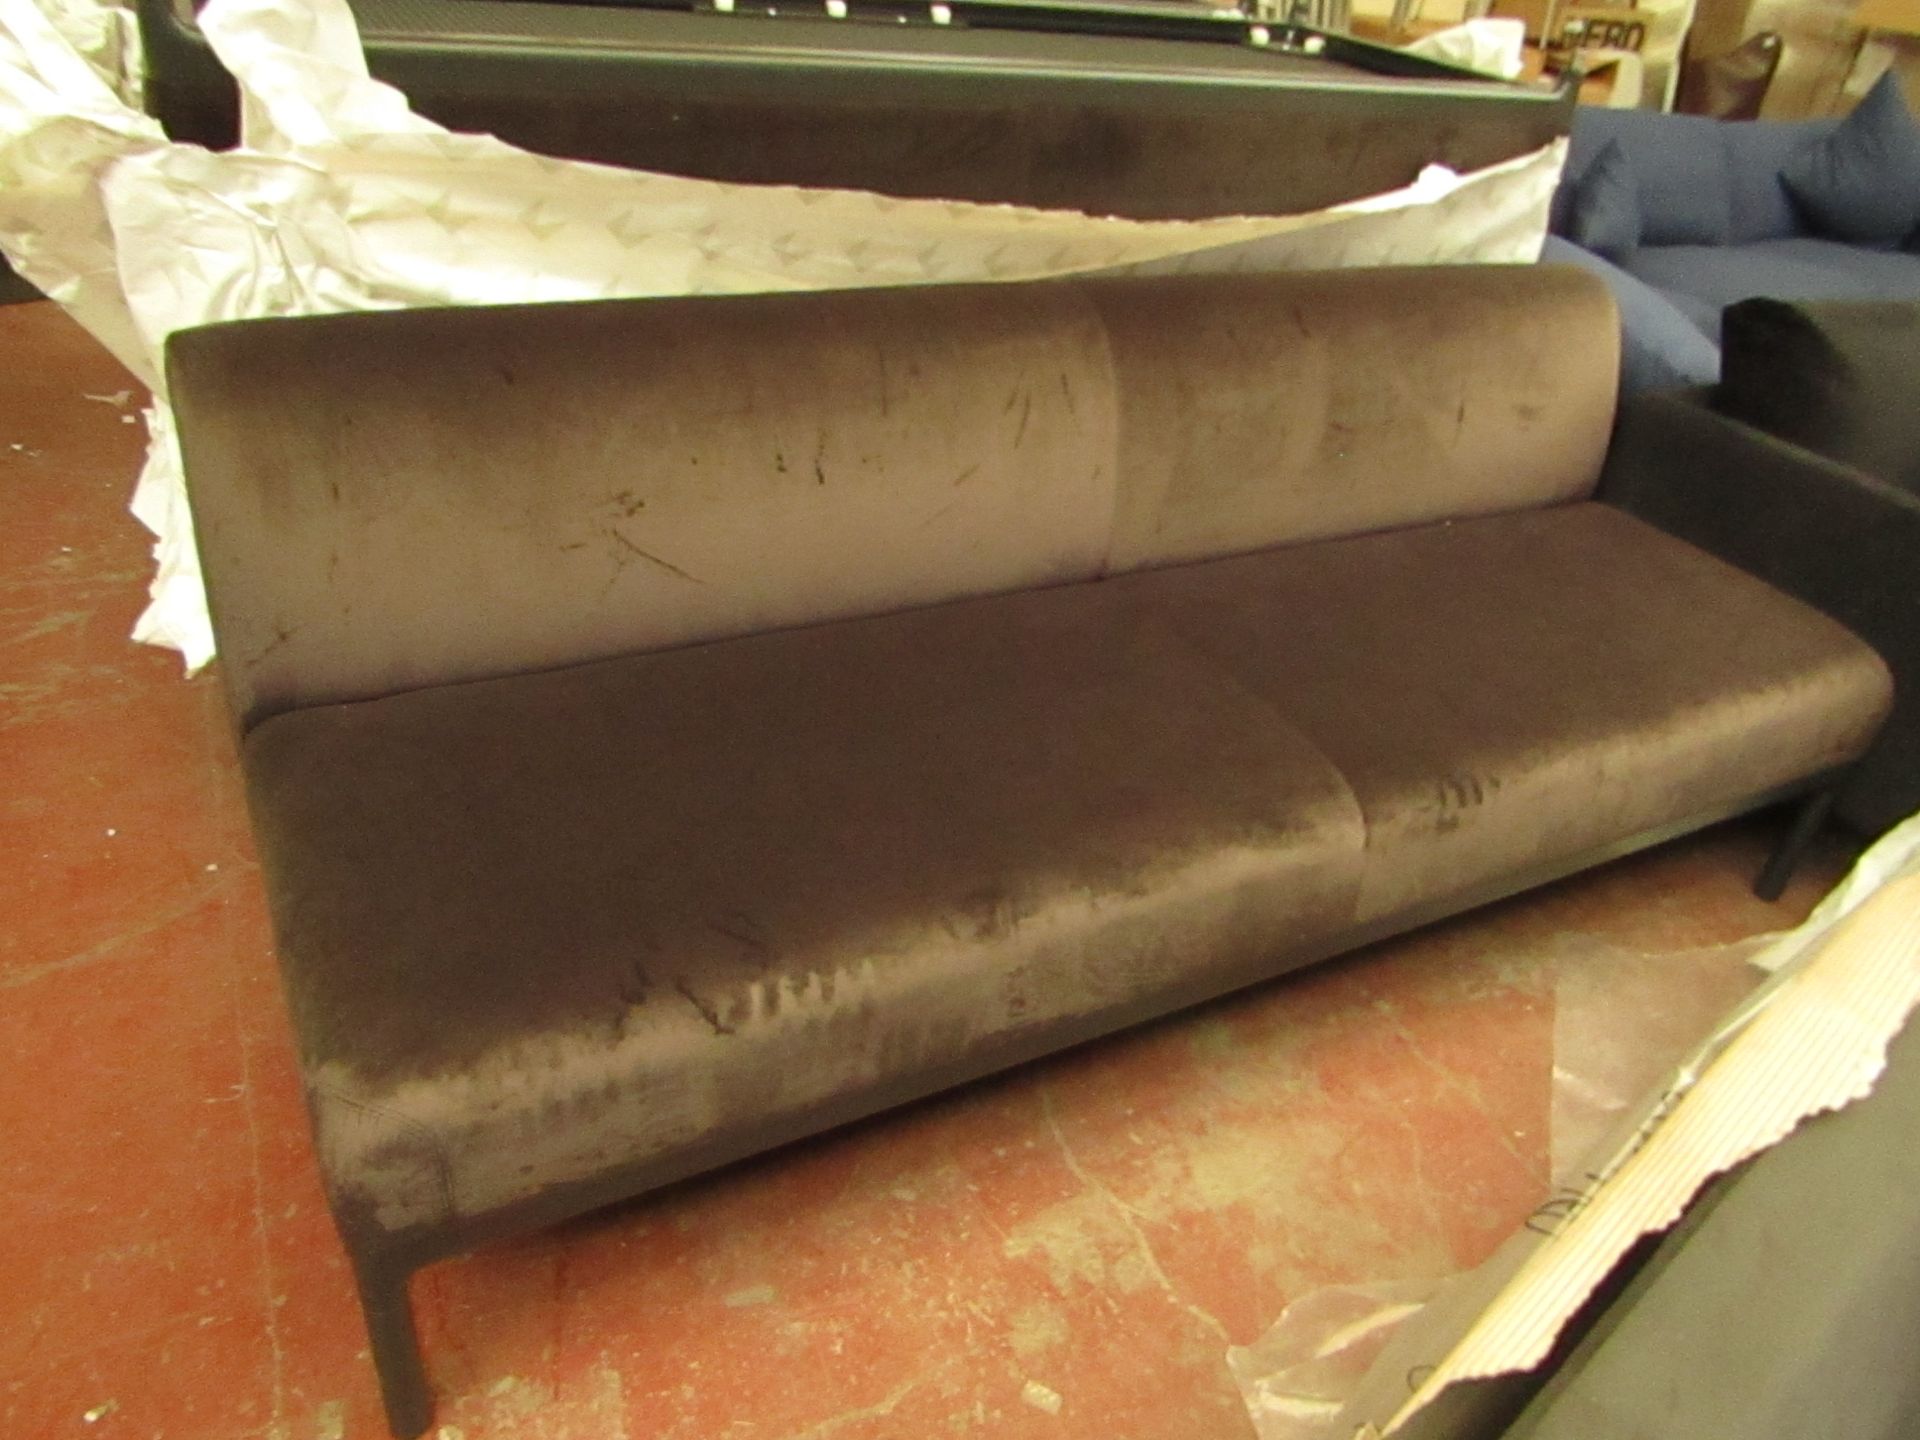 | 1 X | PERASON LLOYD EDGE BENCH | SOFA CUSHION IS IN GOOD CONITION BUT THERE MAY BE SMALL MINOR